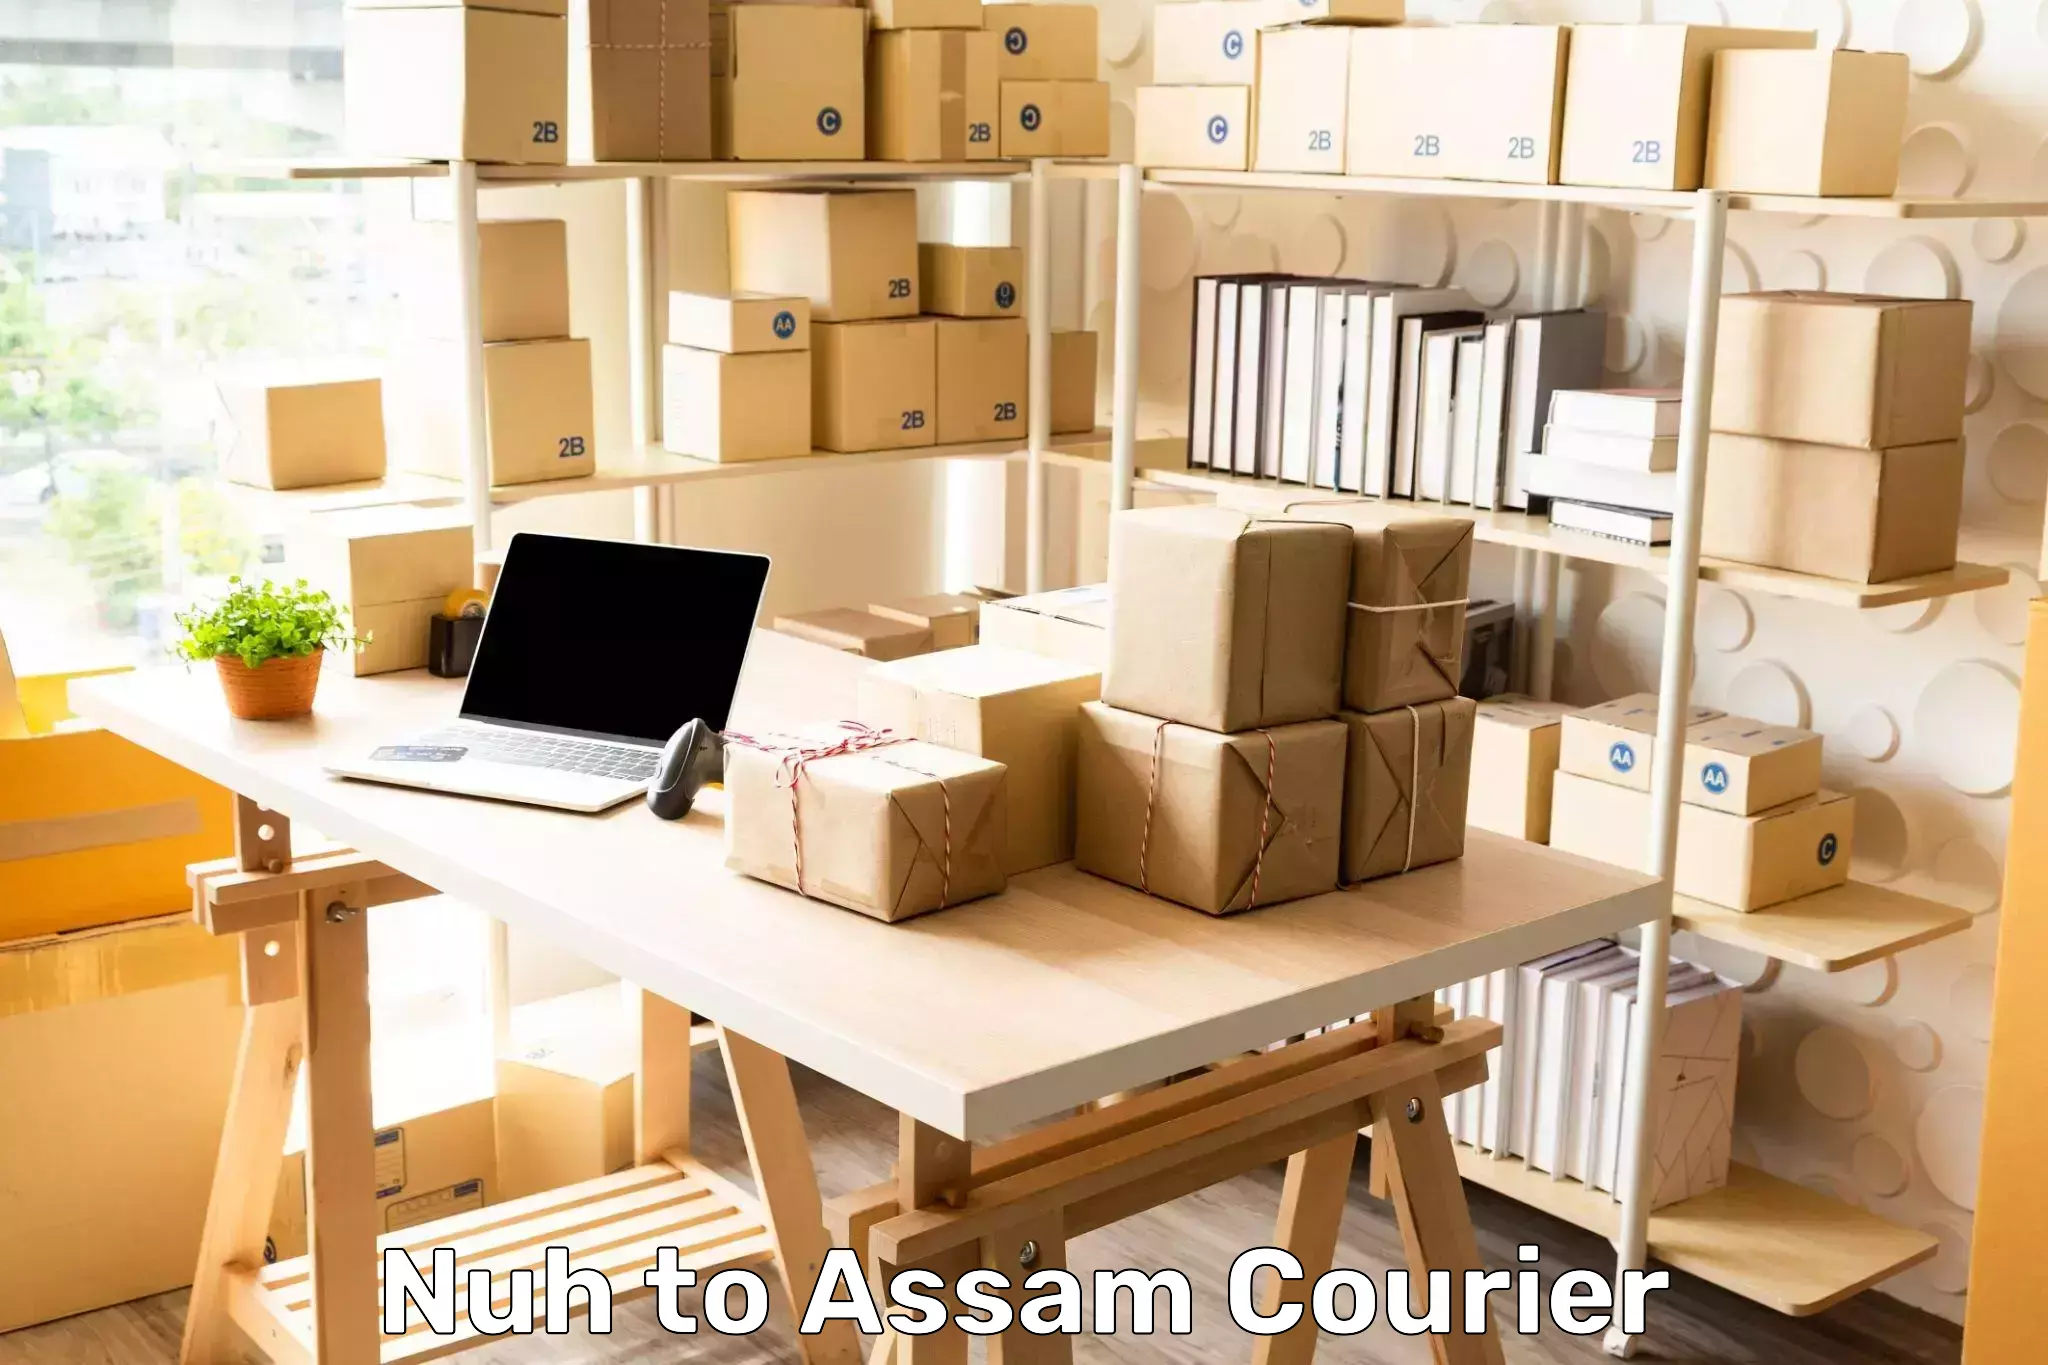 Next-day delivery options Nuh to Assam